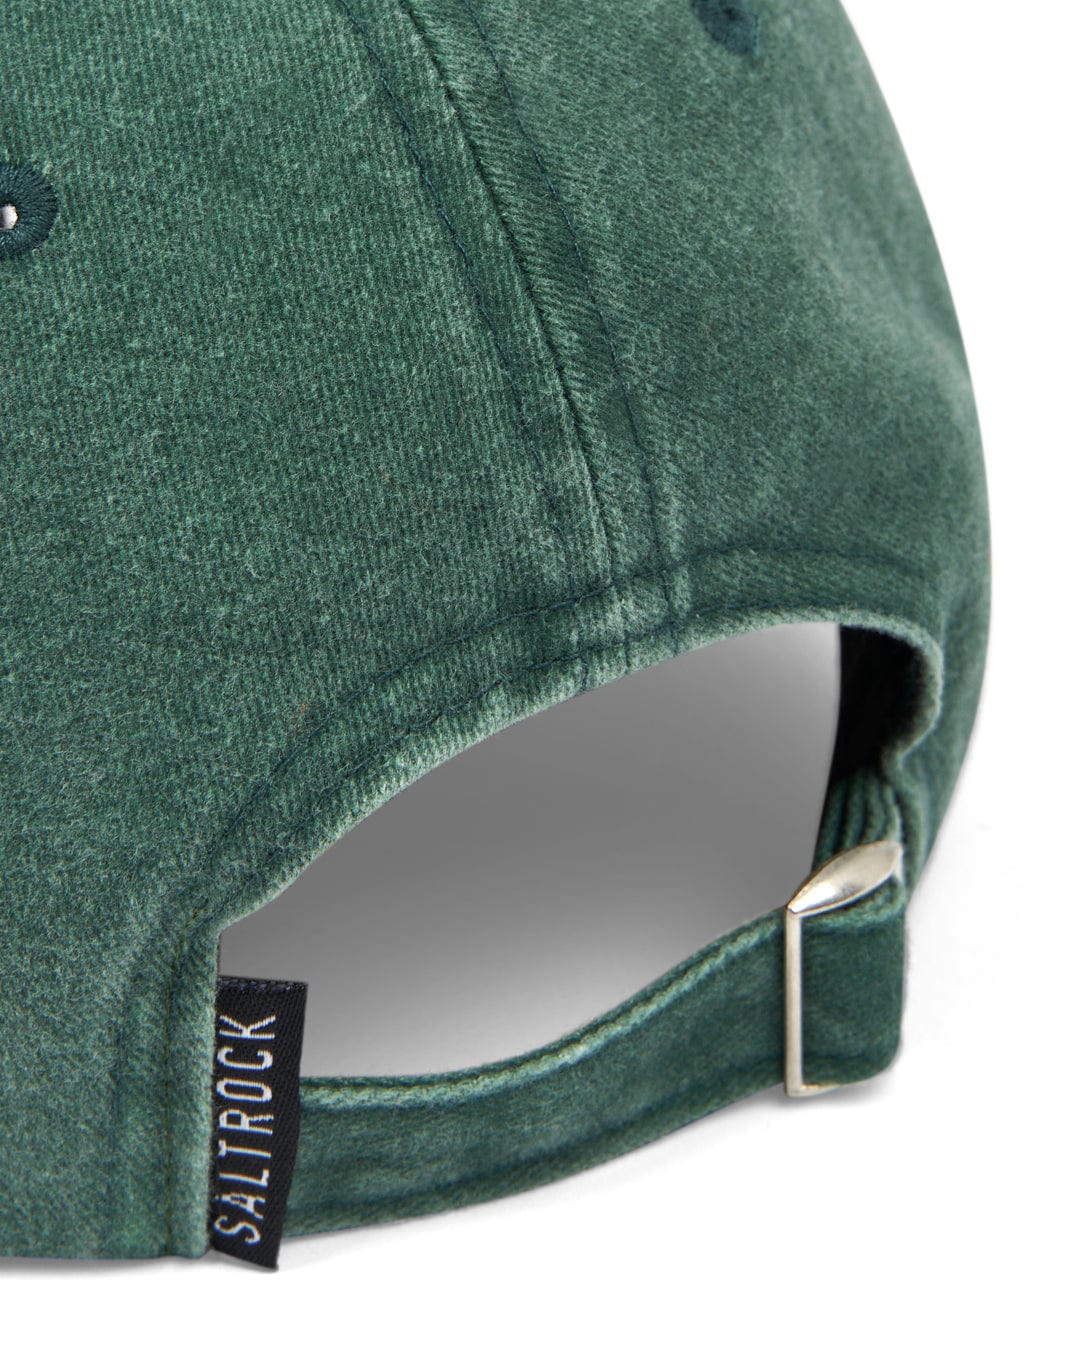 Close-up view of a Saltrock Sunburst Cap - Green with an adjustable strap and metal clasp at the back, featuring a sunburst graphic embroidery on the curved visor and a small black label with white text.